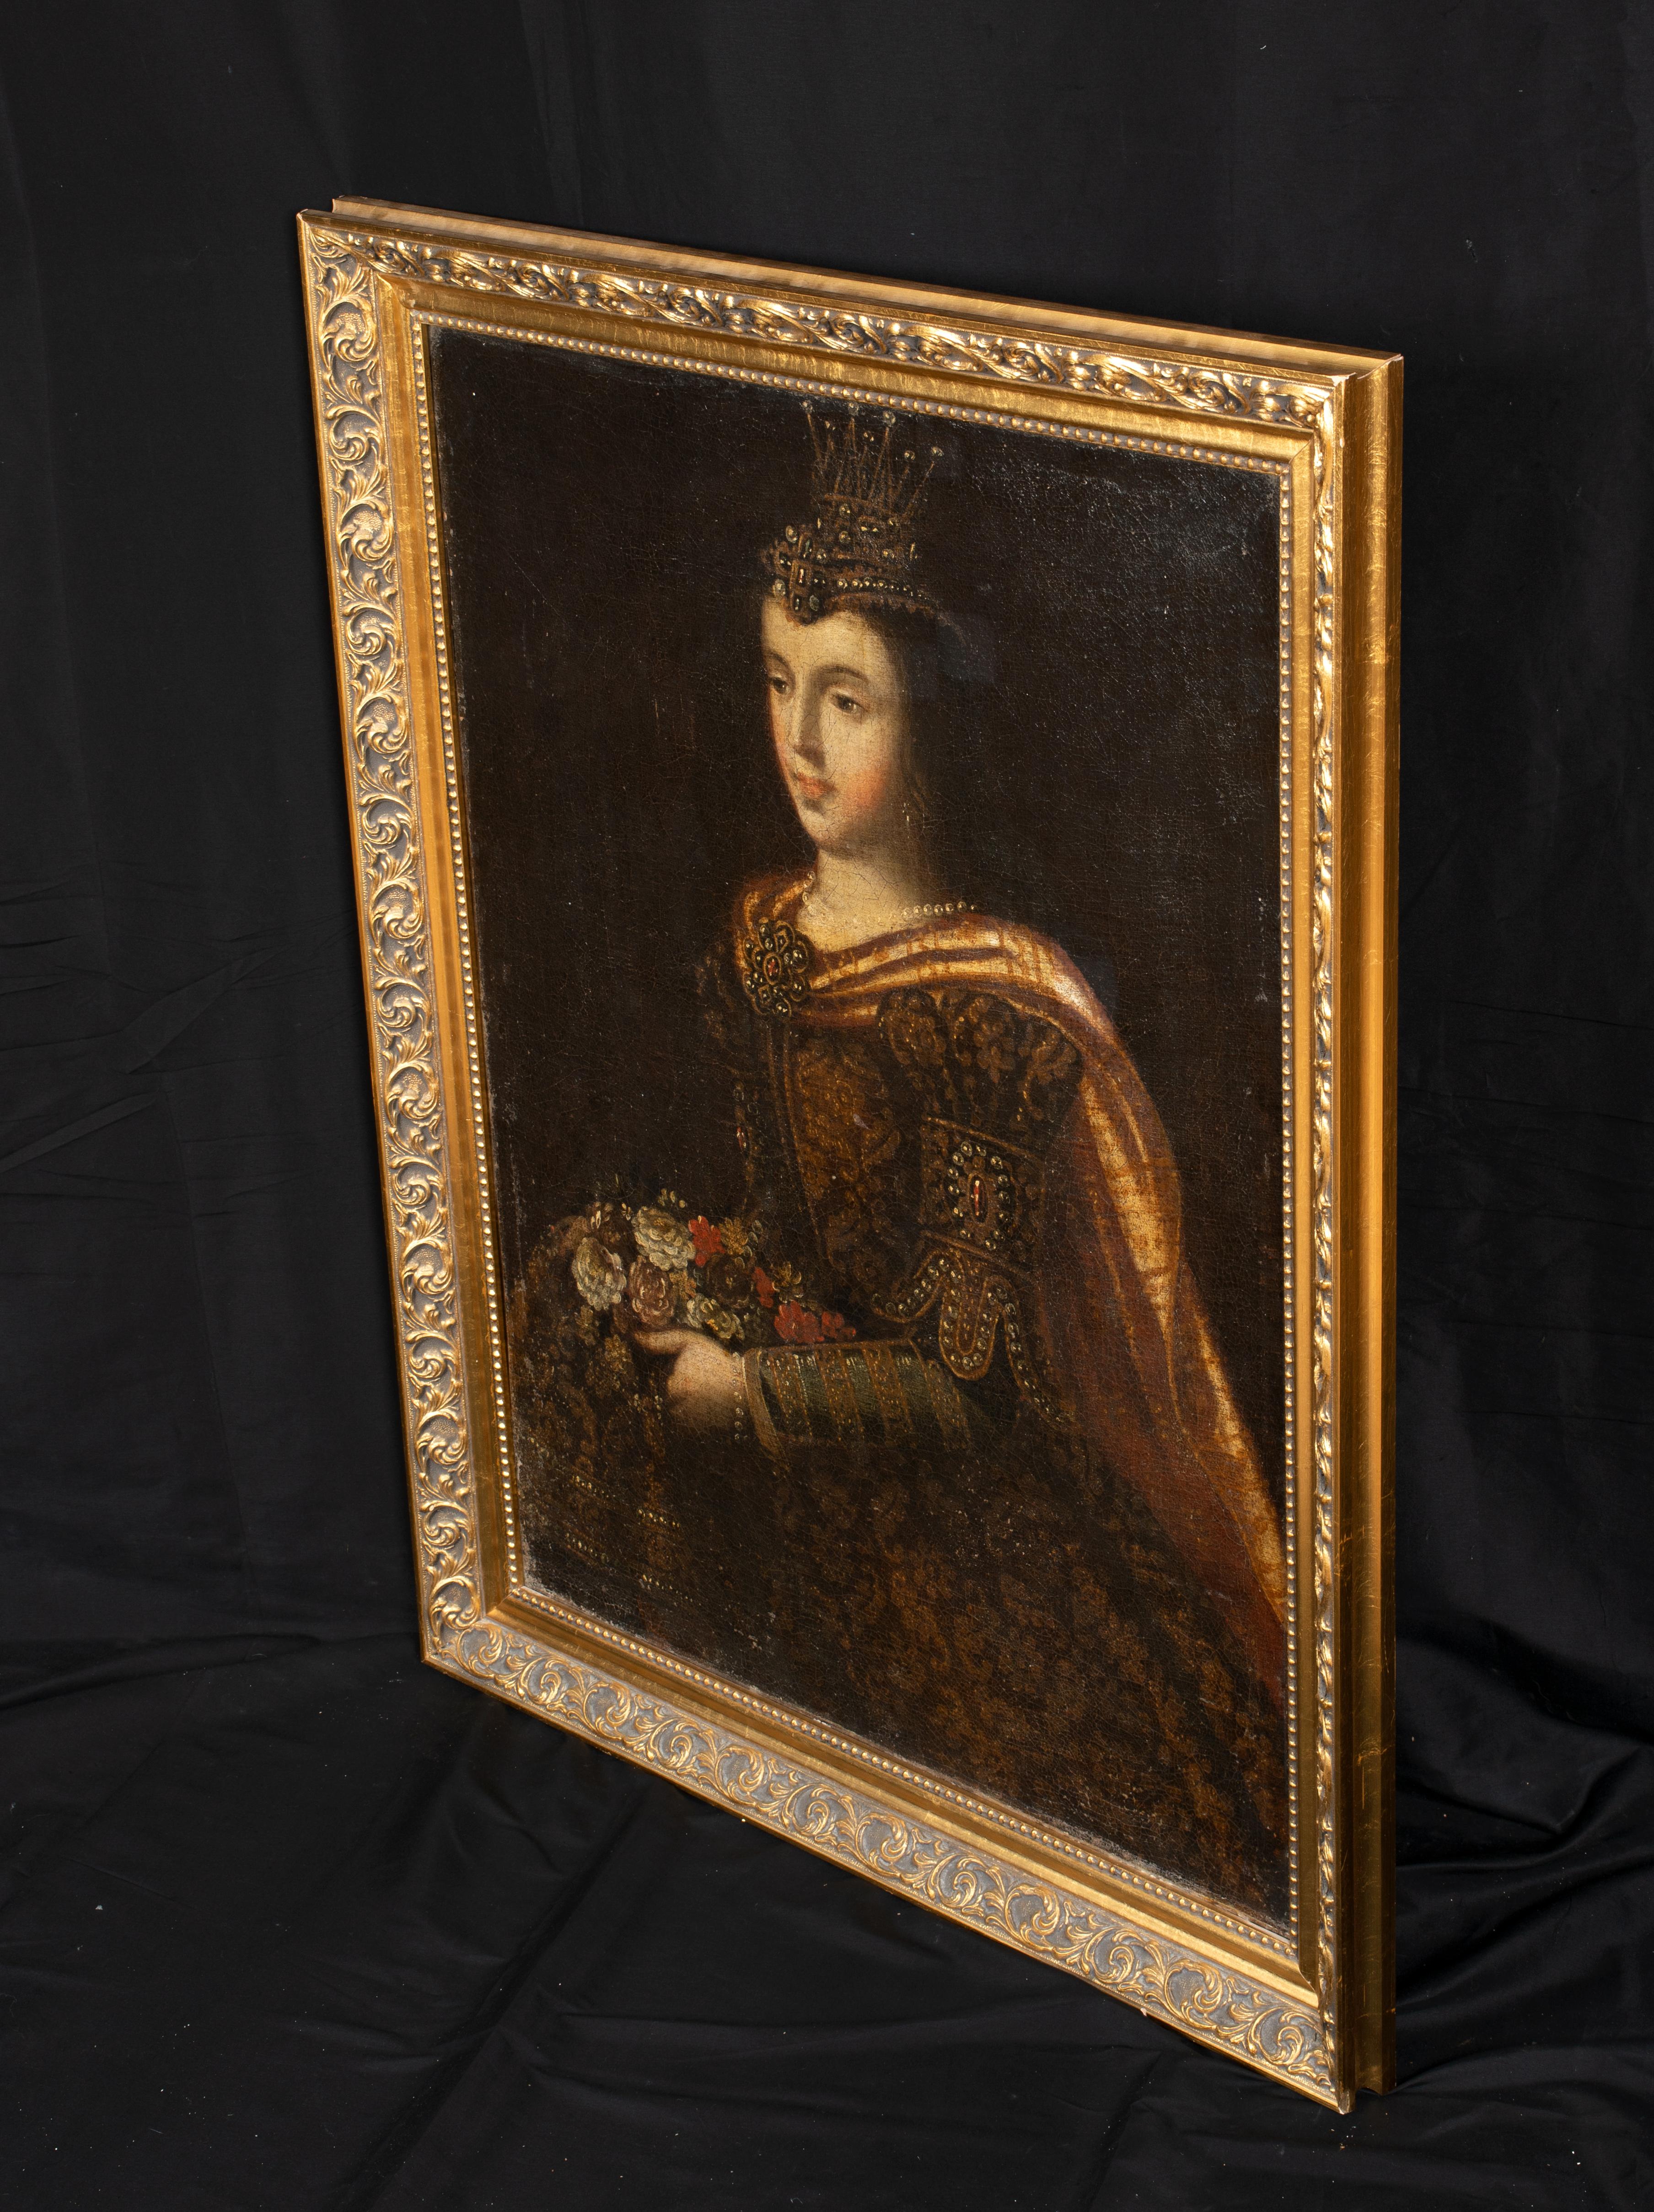 Saint Dorothy, 16th Century

Spanish School

Large 16th/17th century Spanish Old Master depiction of Saint Dorothy, oil on canvas. Excellent quality and condition important early depiction of the virgin martyr carrying the headress of fruits and